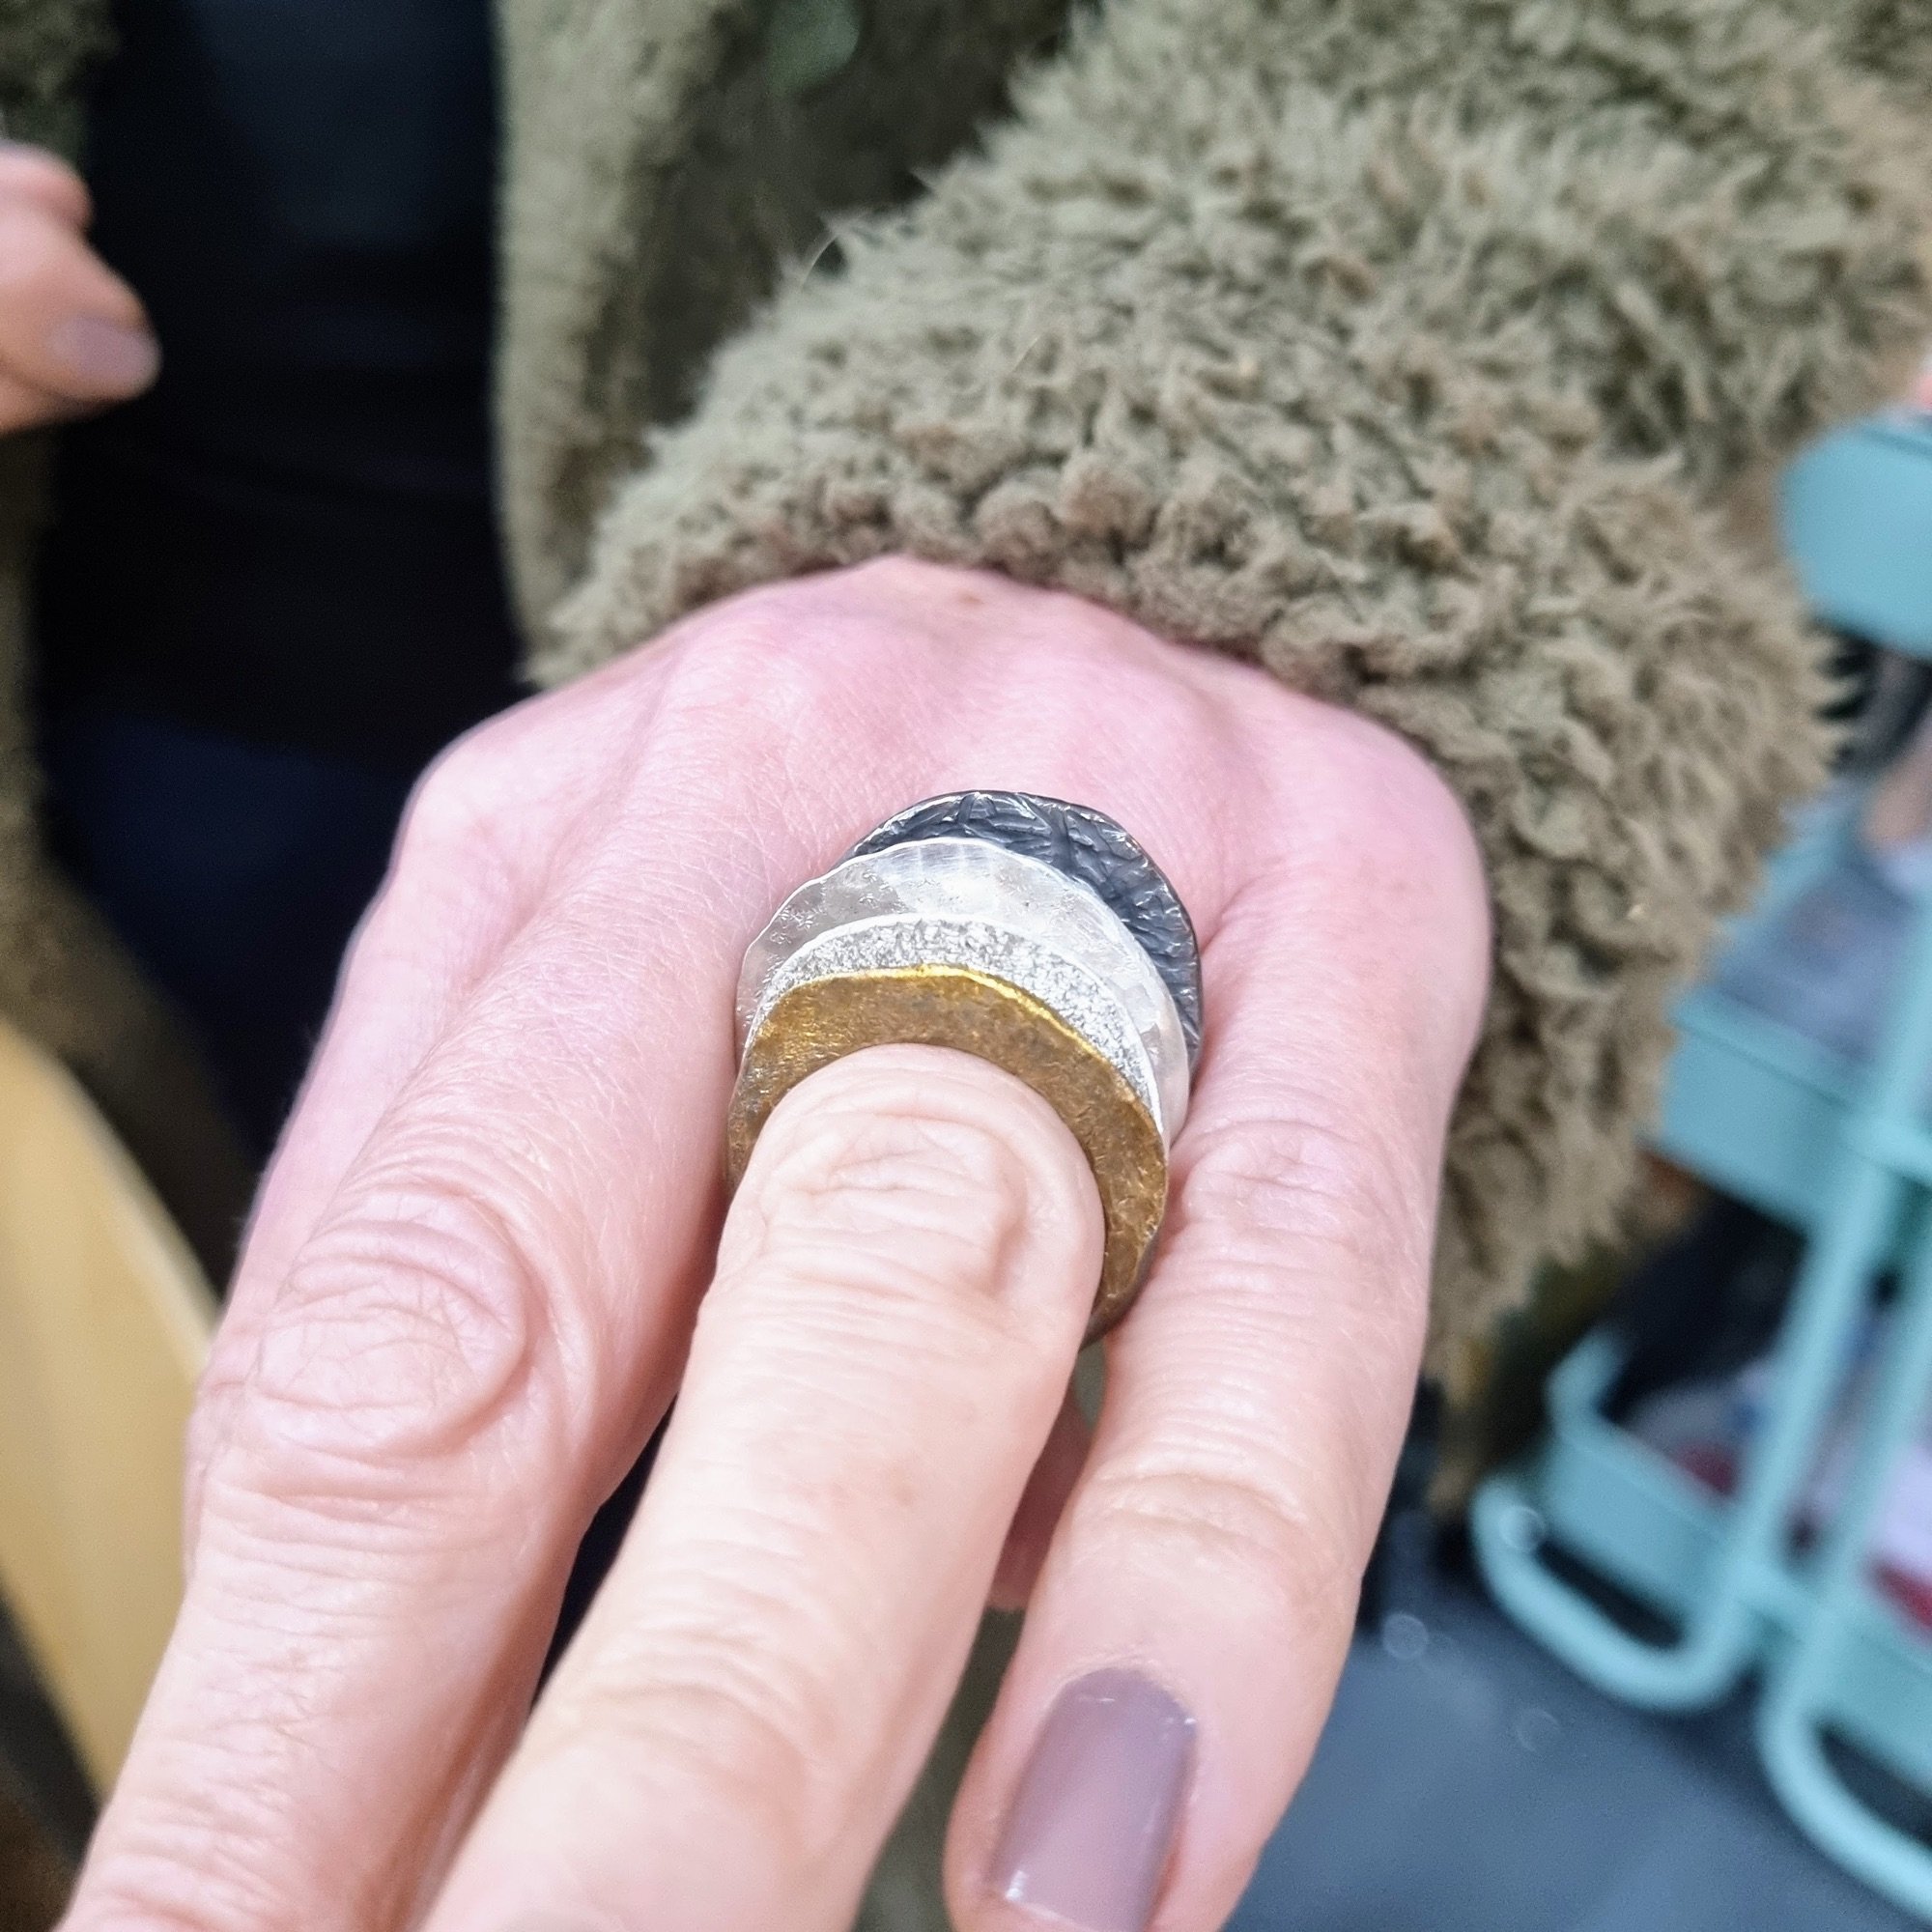 Sharon's textured rings